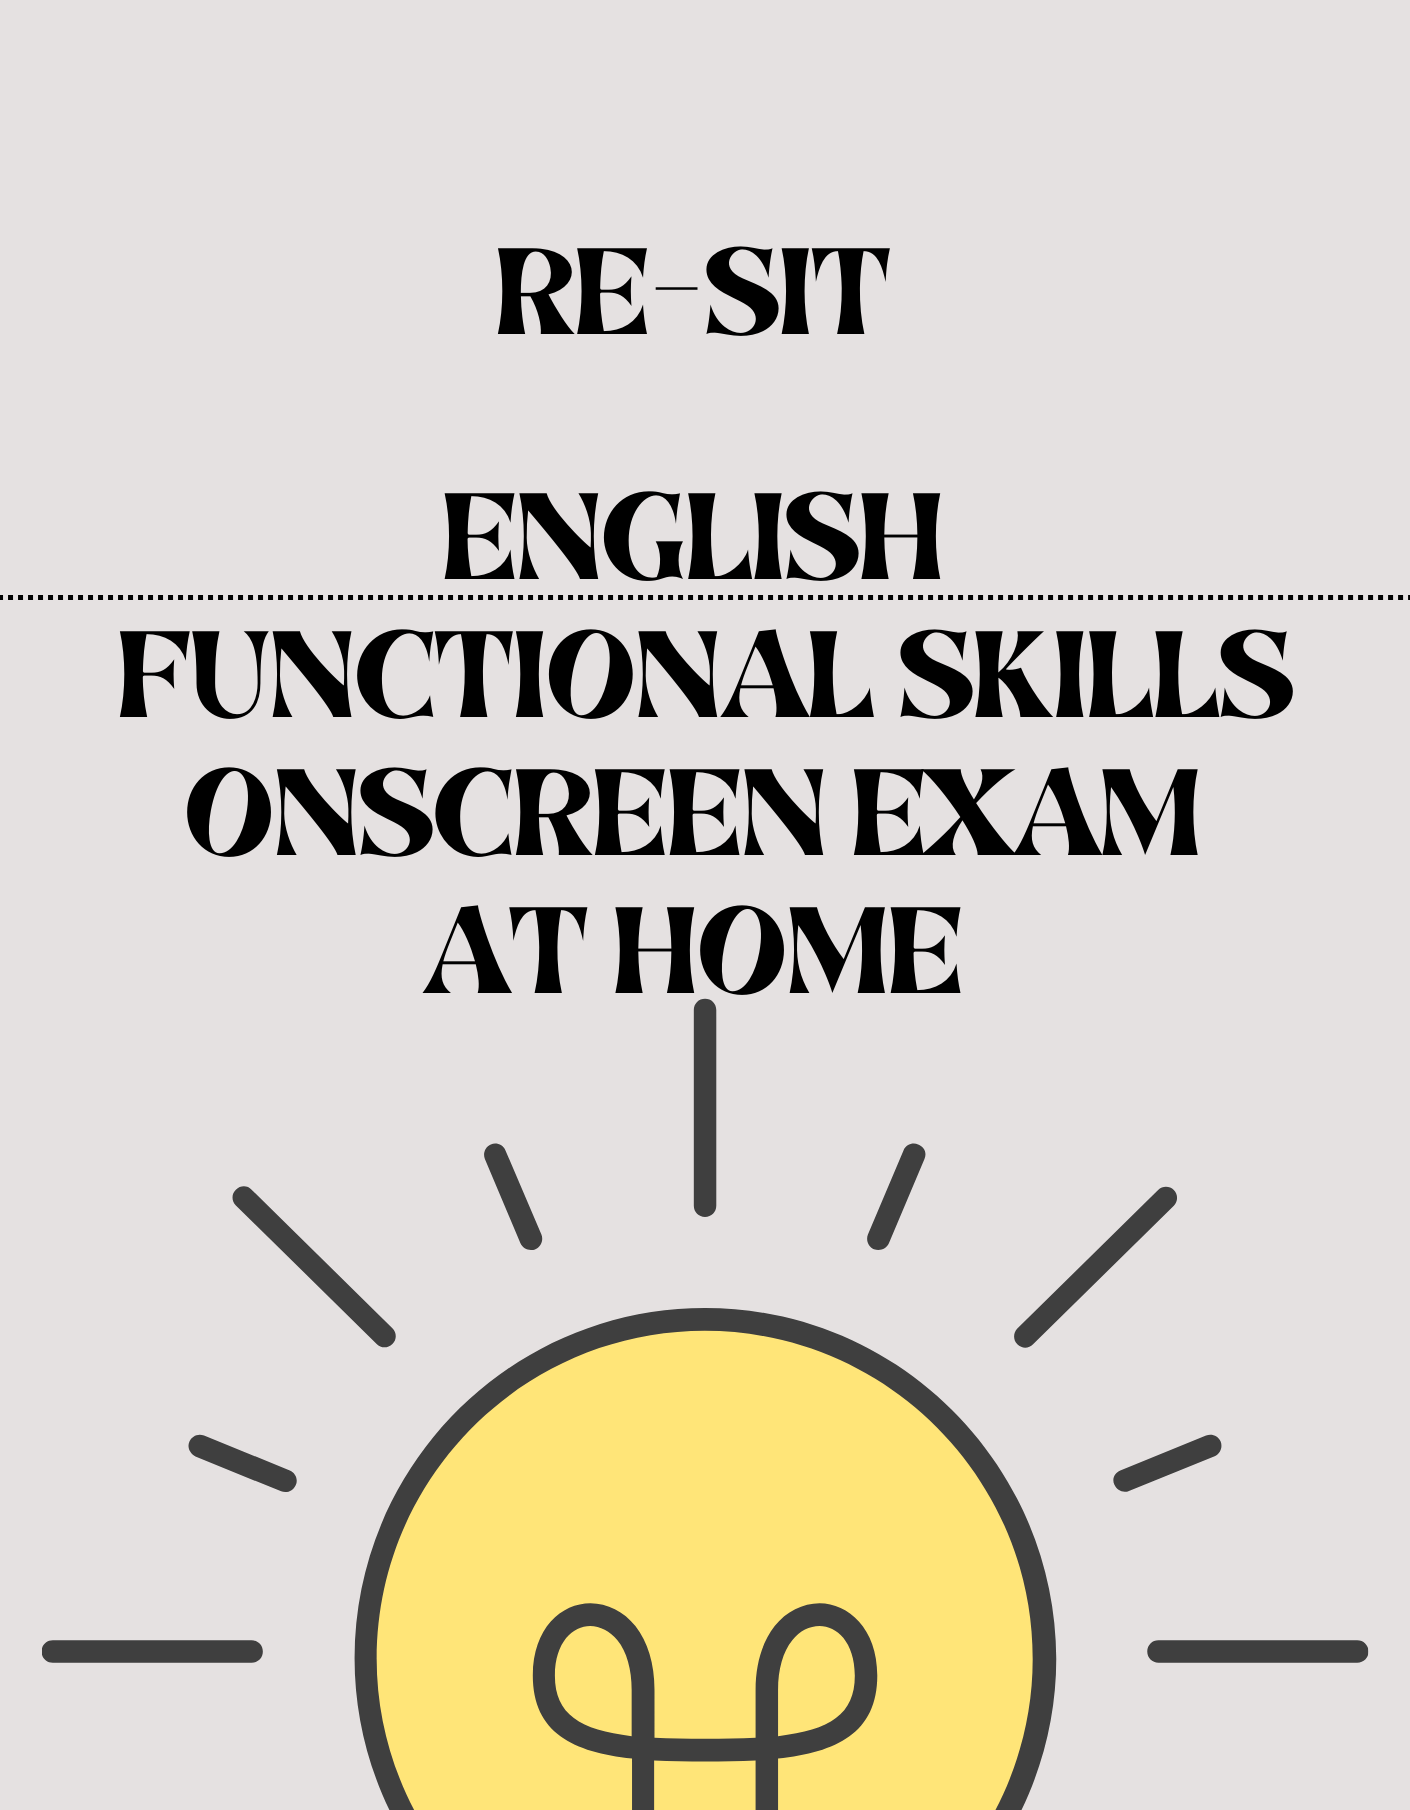 Re-sit English Functional Skills Onscreen Exam - At Home. - Exam Centre Birmingham Limited